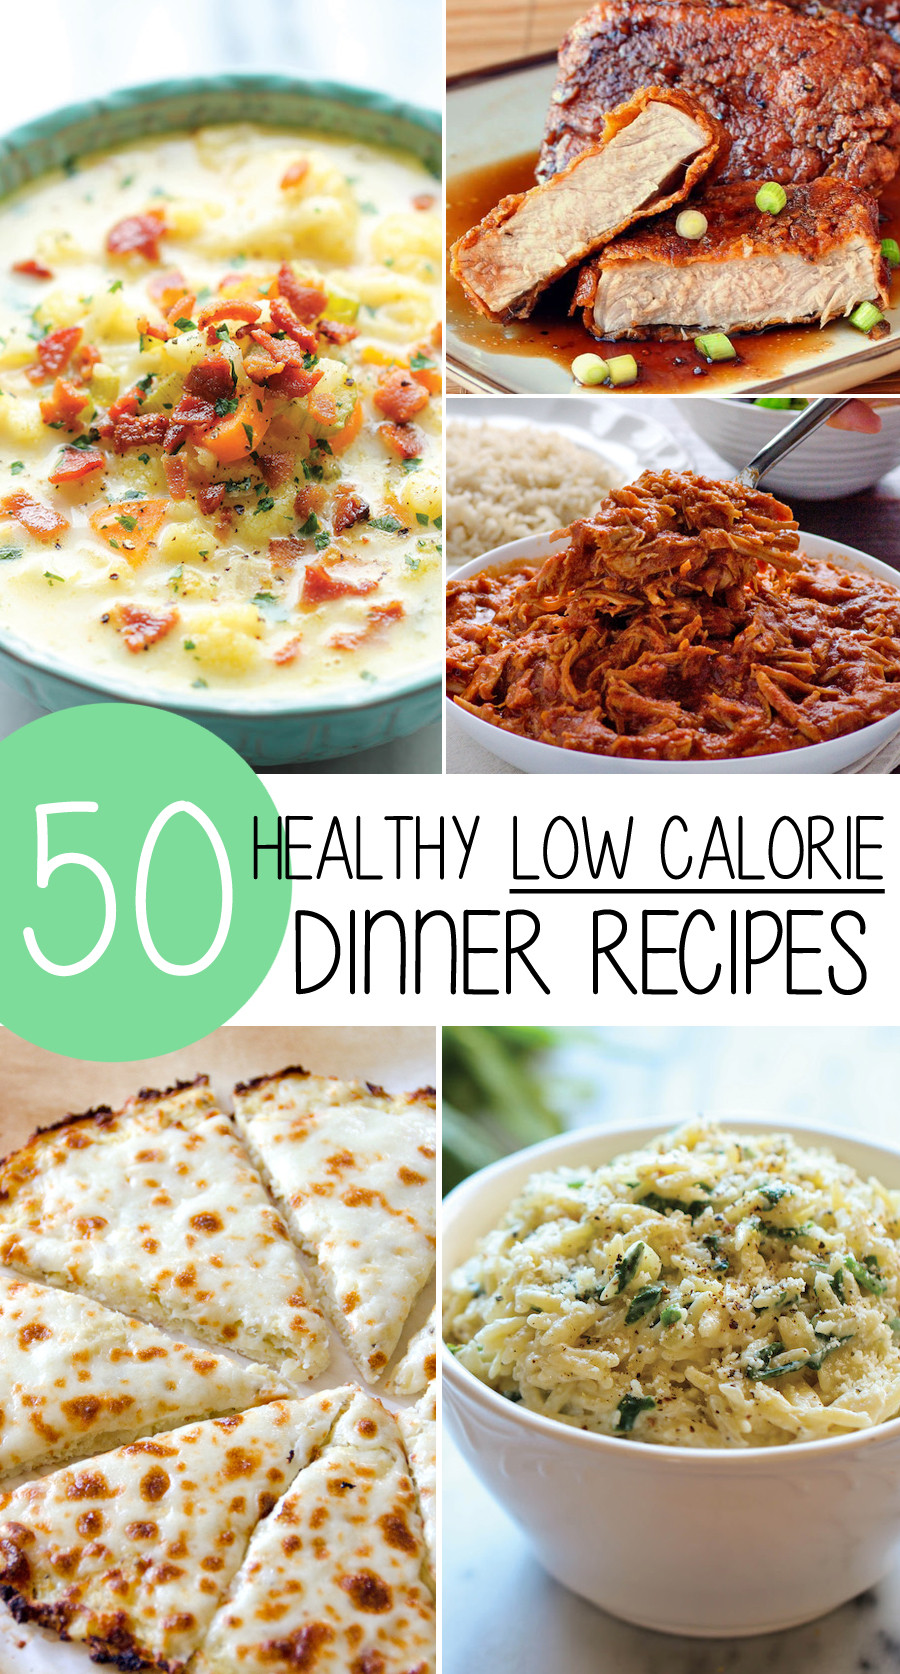 Healthy Low Calorie Snacks
 50 Healthy Low Calorie Weight Loss Dinner Recipes